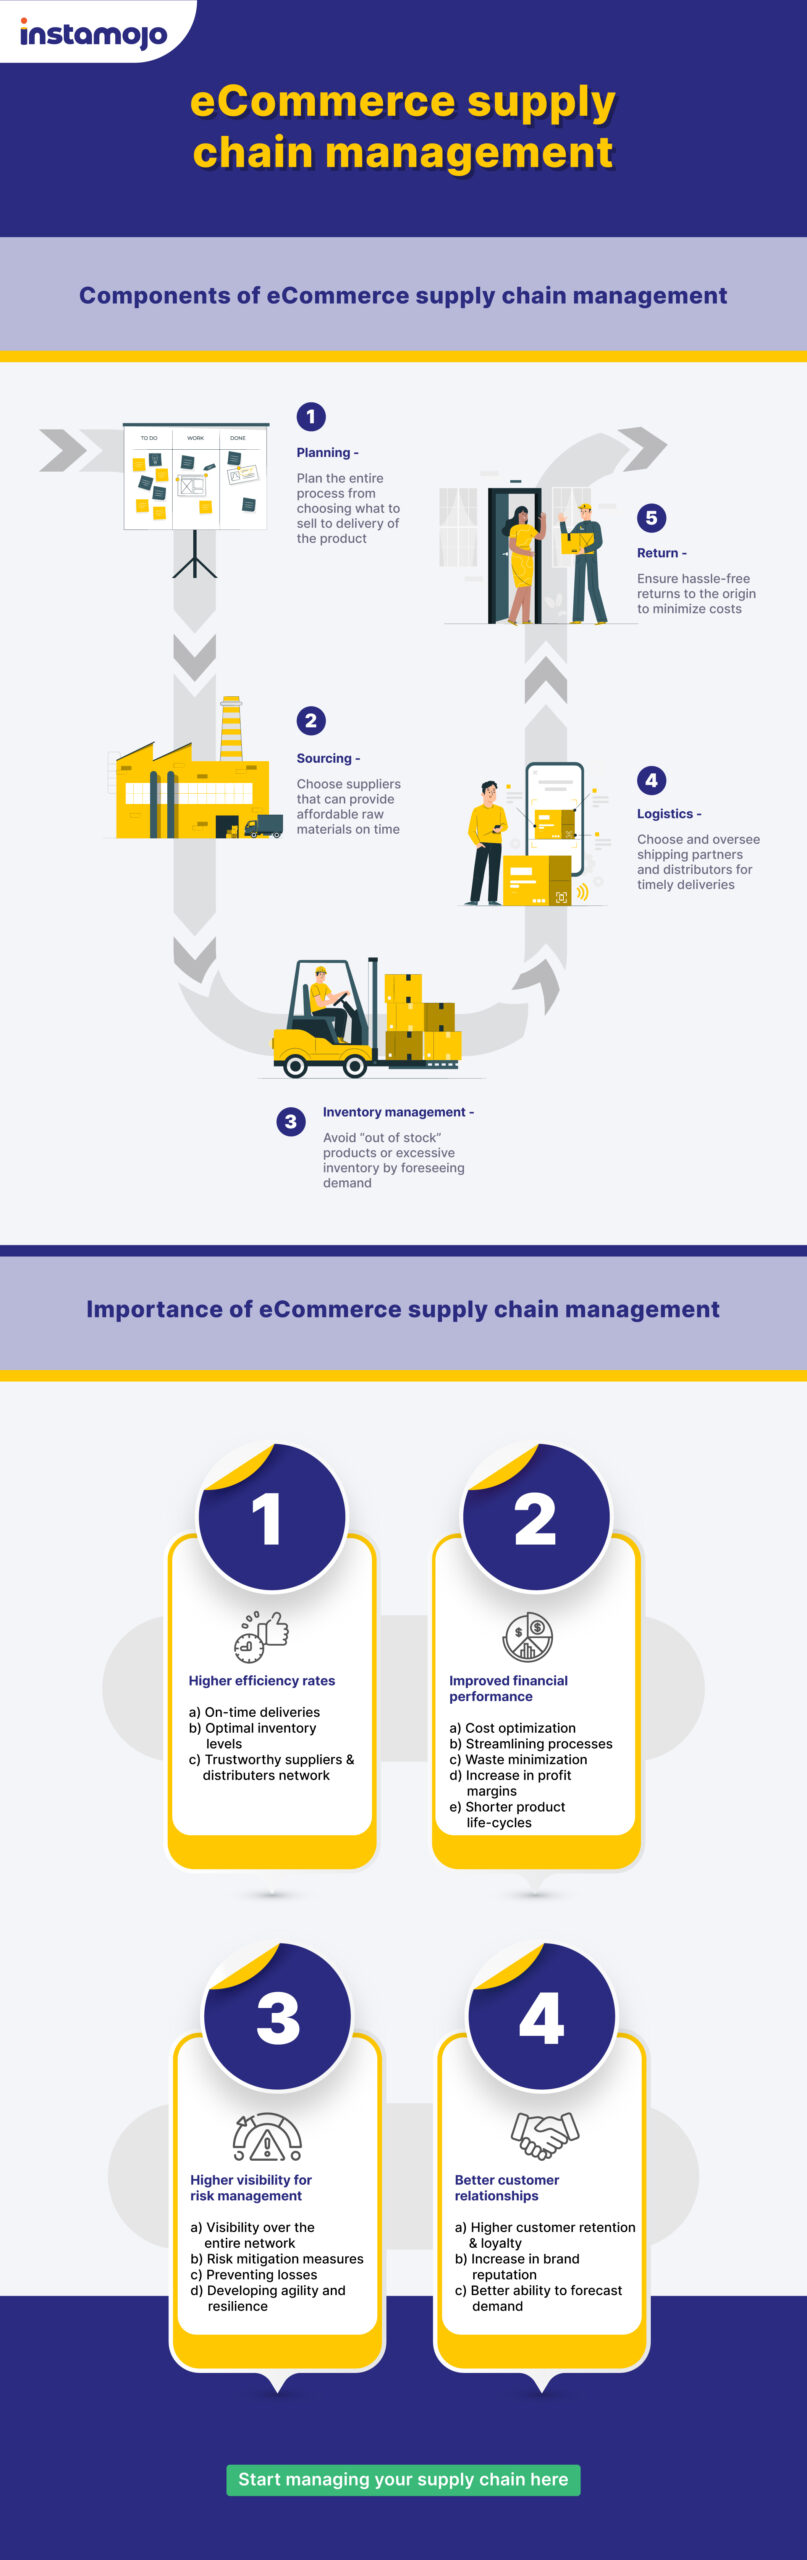 Importance of eCommerce supply chain management